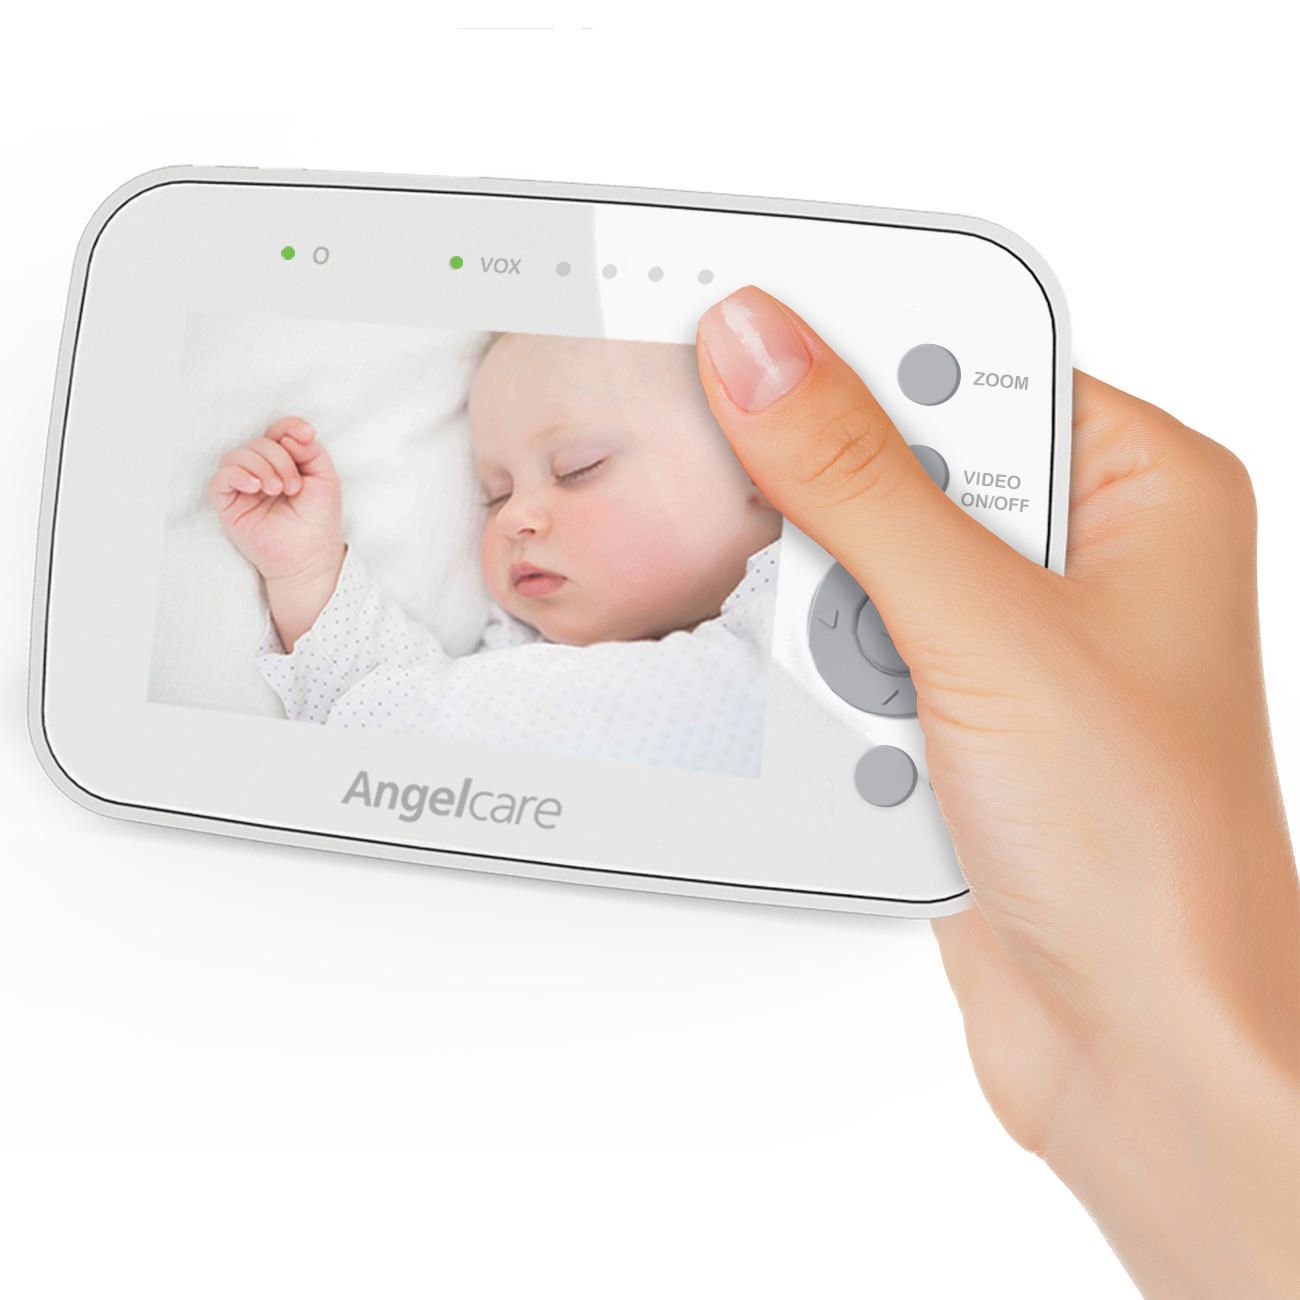 angelcare ac1300 charger uk